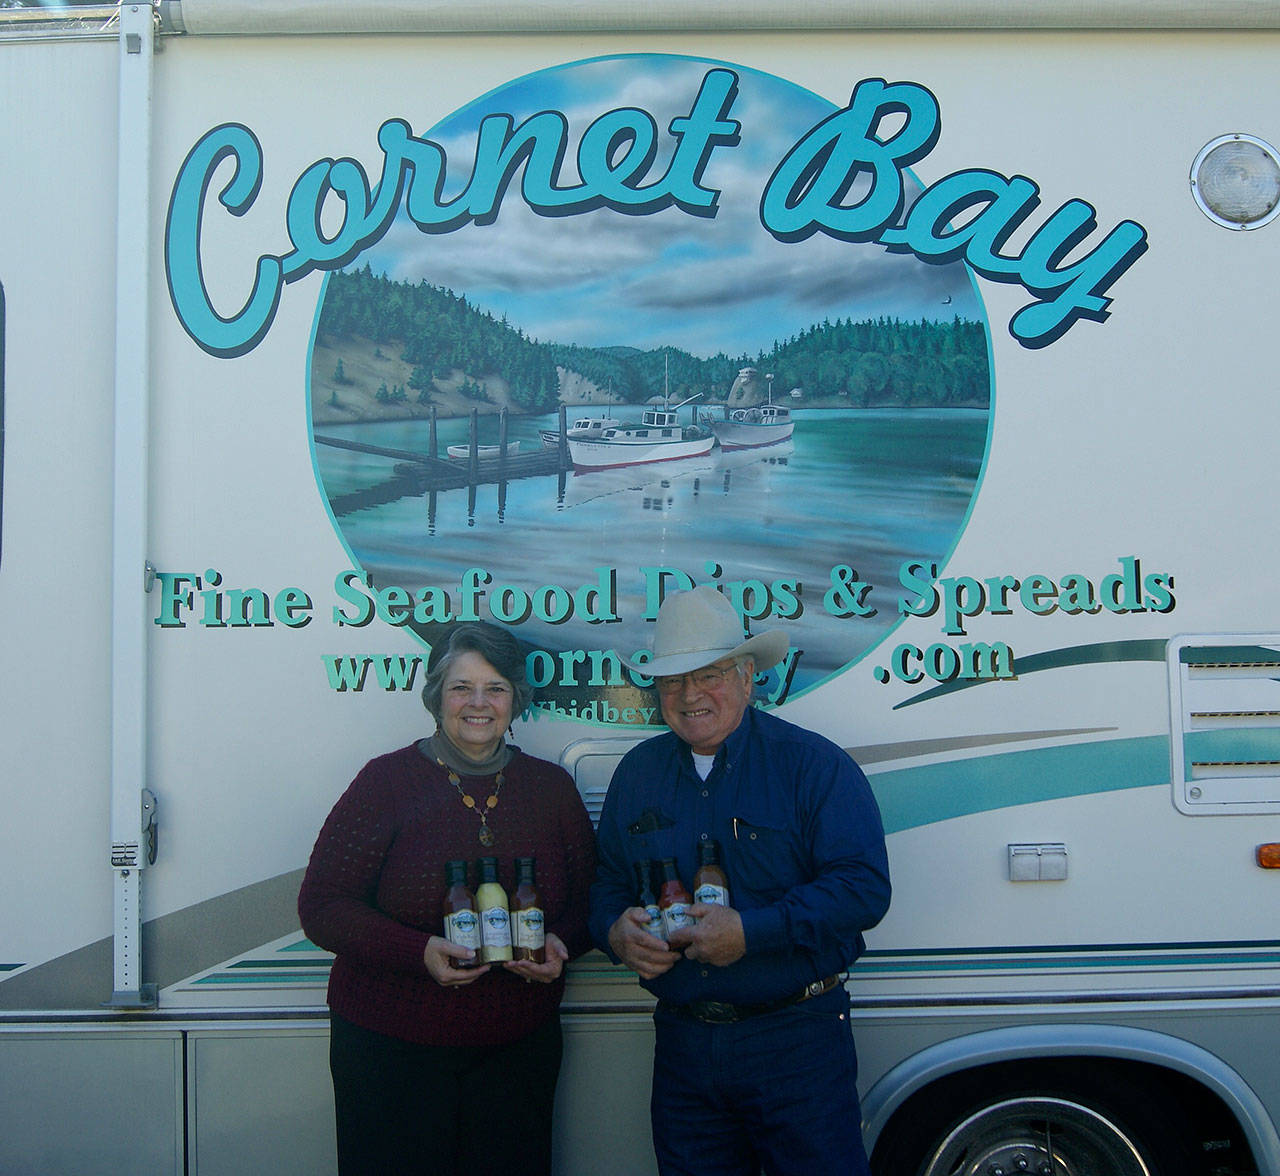 Photo by Maria Matson/Whidbey News Group.                                &lt;em&gt;Cornet Bay Company owners Arnie and Joanne Deckwa stand with their new seafood line of sauces. In the background, painted on their RV is the company’s logo depicting Cornet Bay, the view across from their office.&lt;/em&gt;